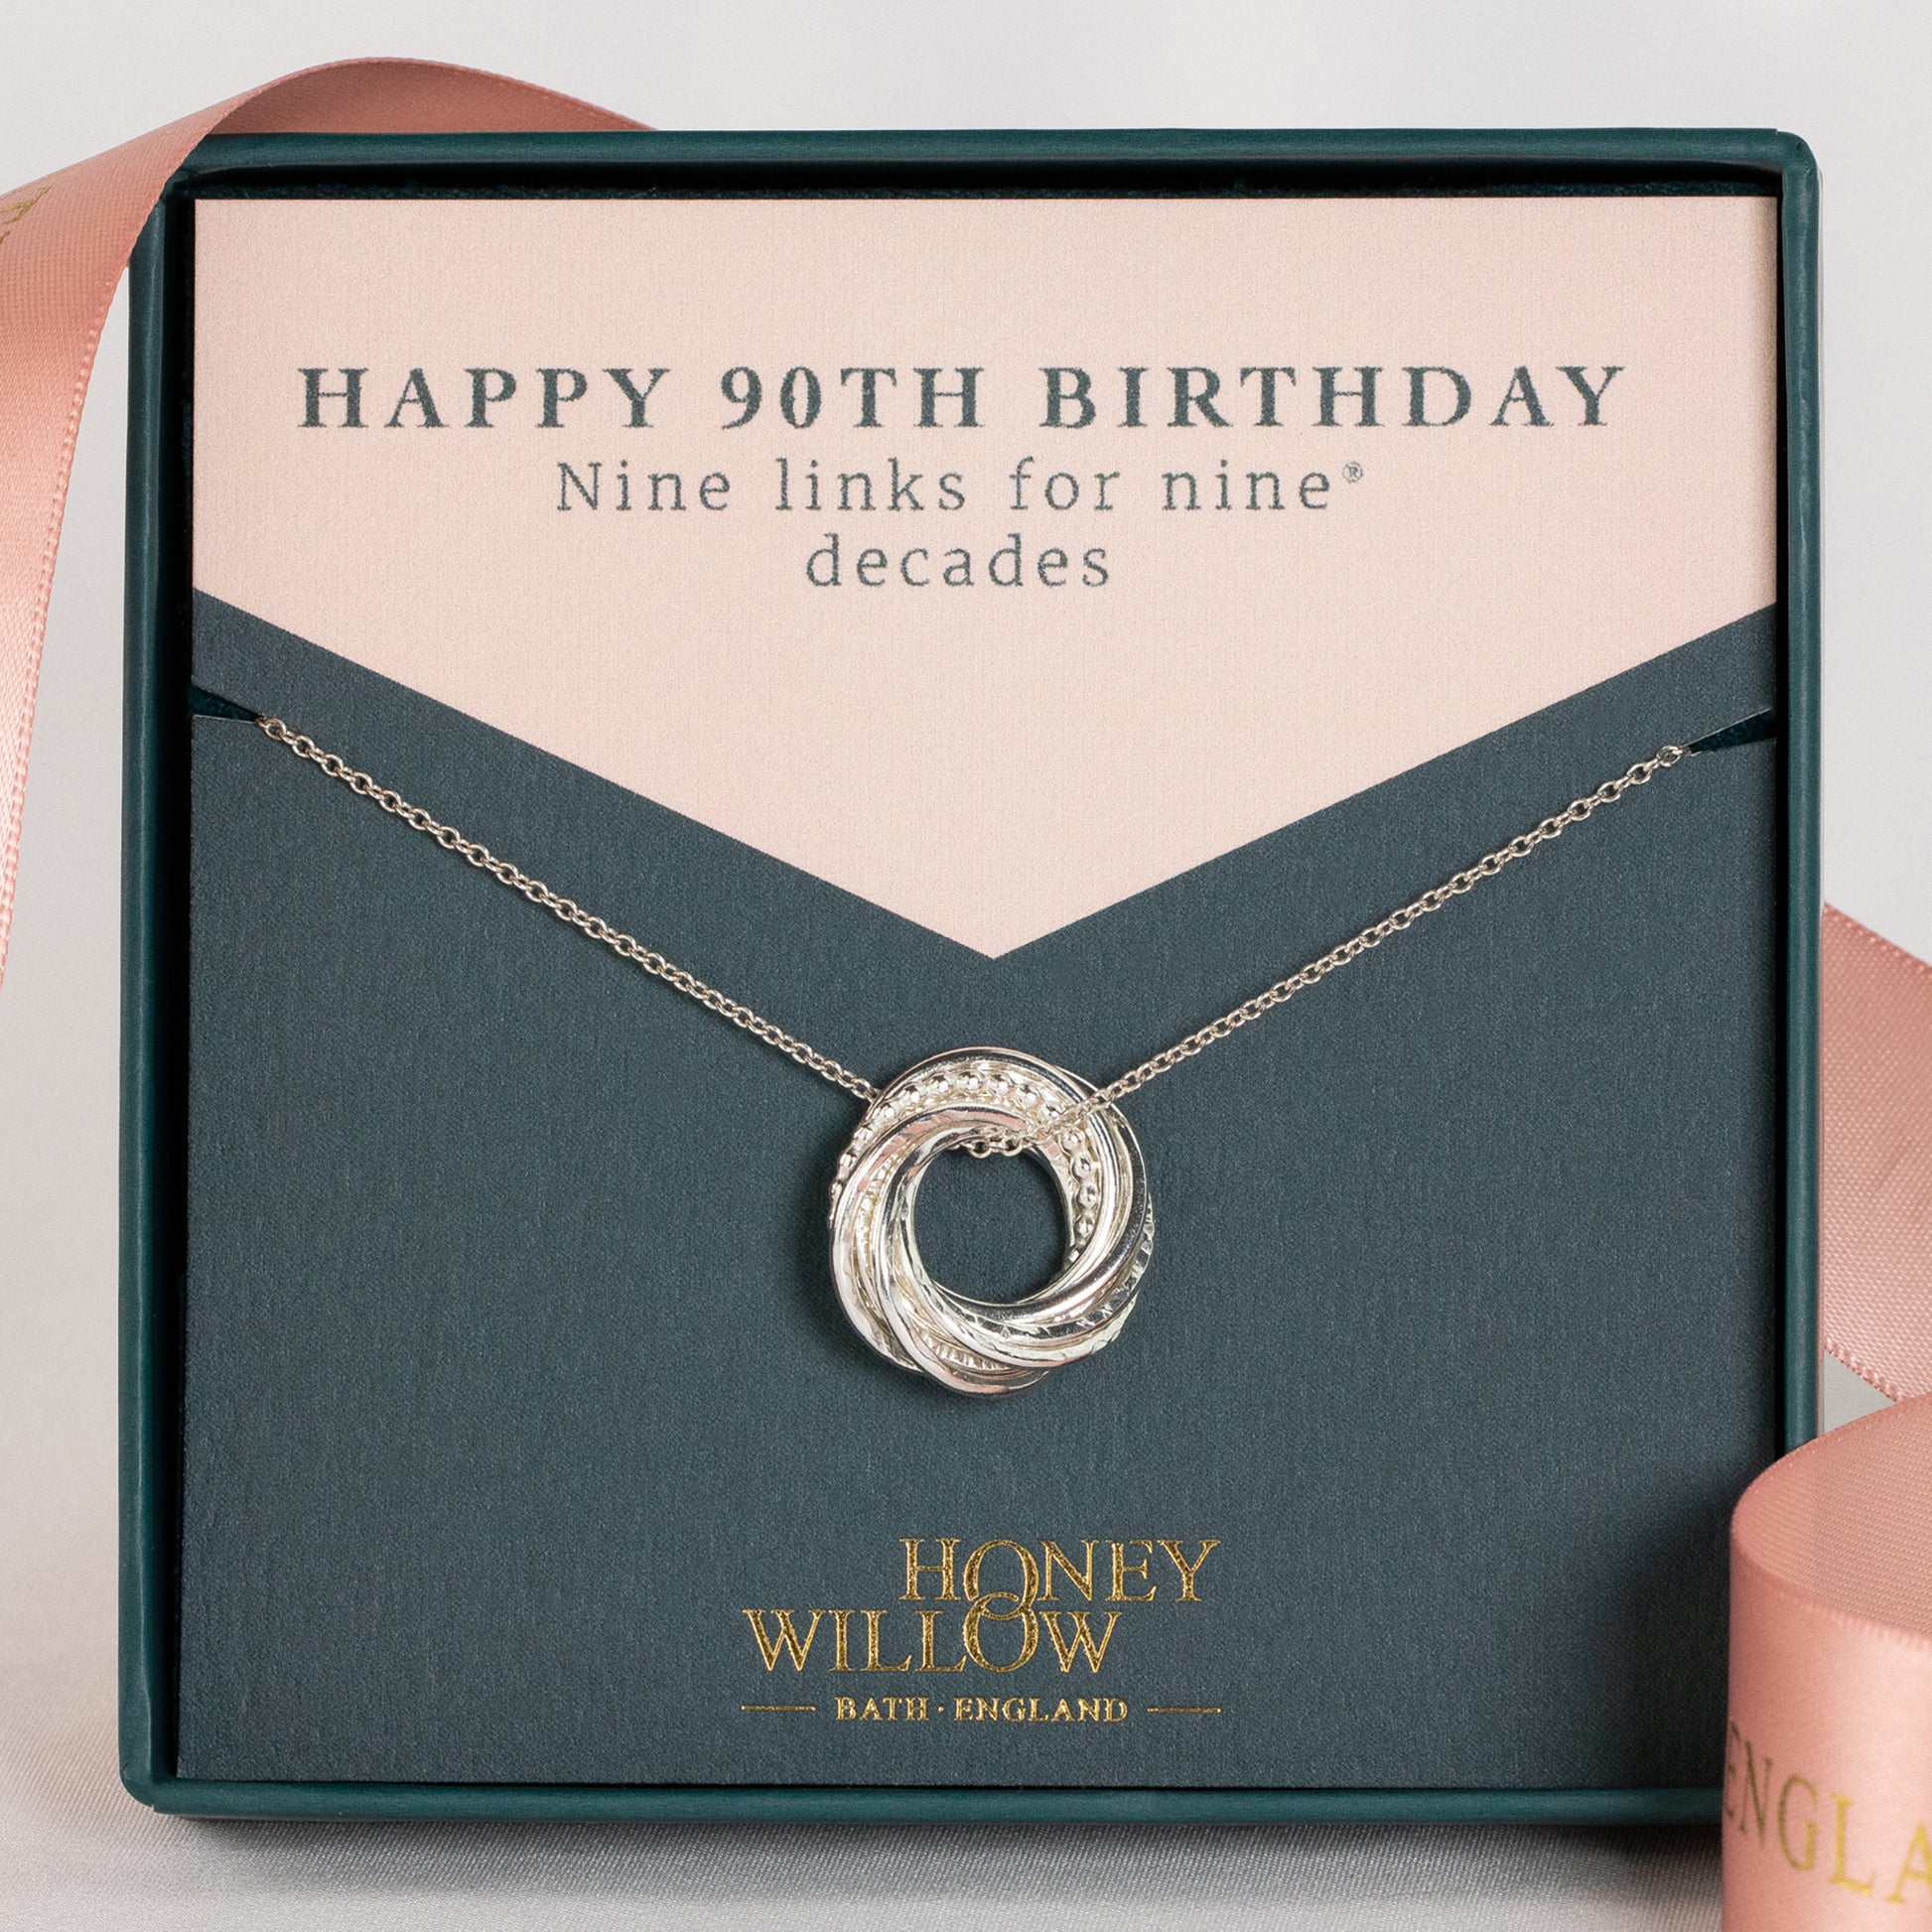 90th Birthday Necklace - The Original 9 Links for 9 Decades Necklace - Petite Silver